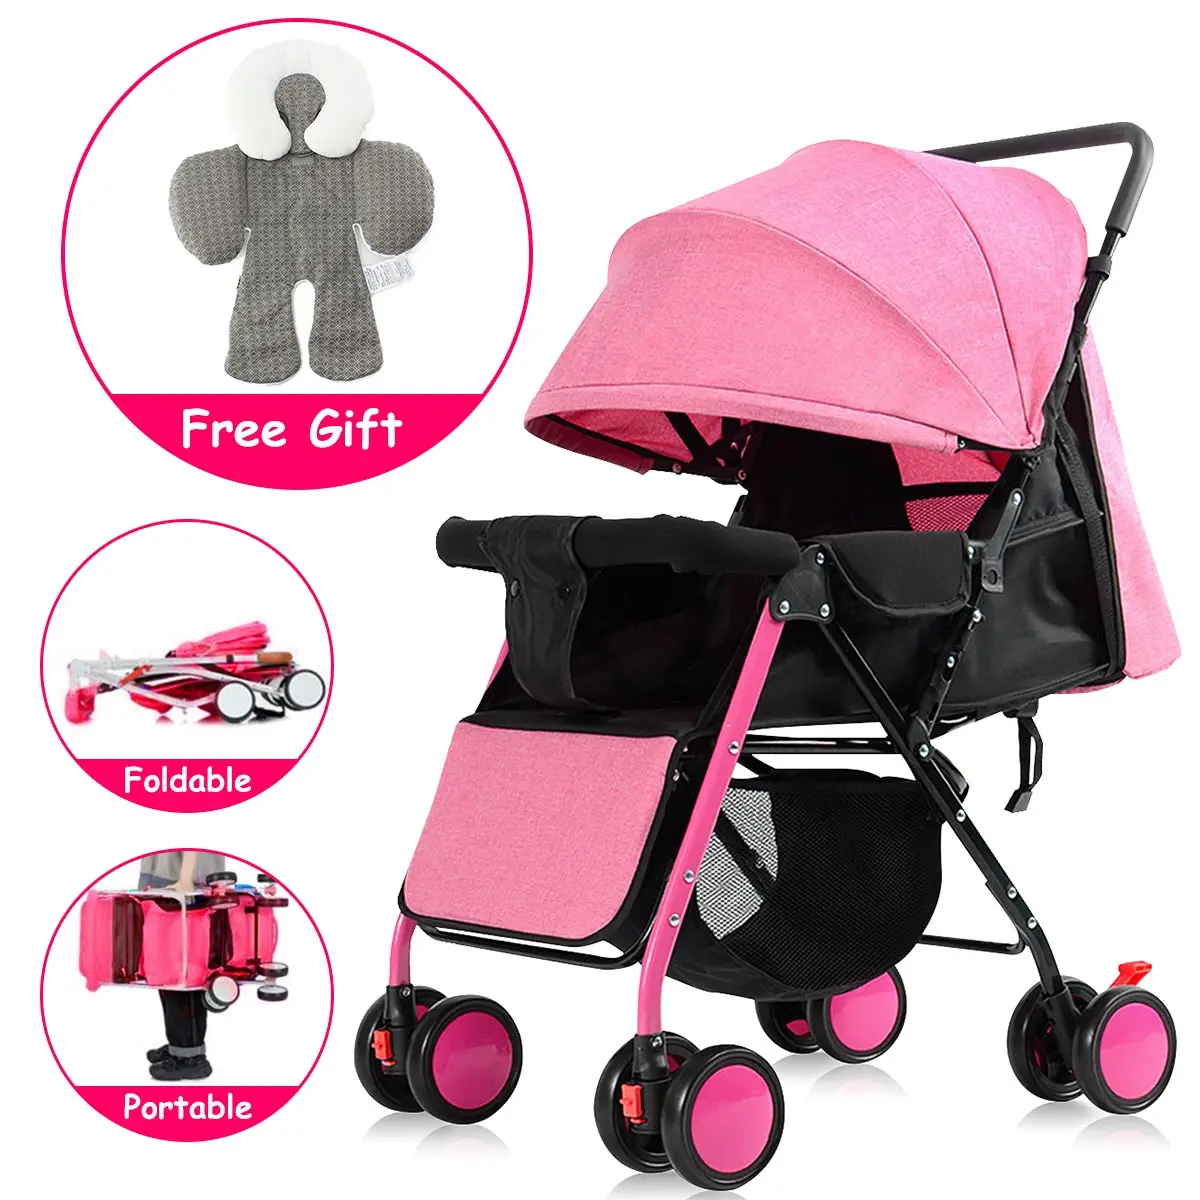 Baby Stroller Lightweight Shake-proof With Adjustable Pedal Folding Portable Baby Carriage Trolley For 0-3 Years Old Baby Car